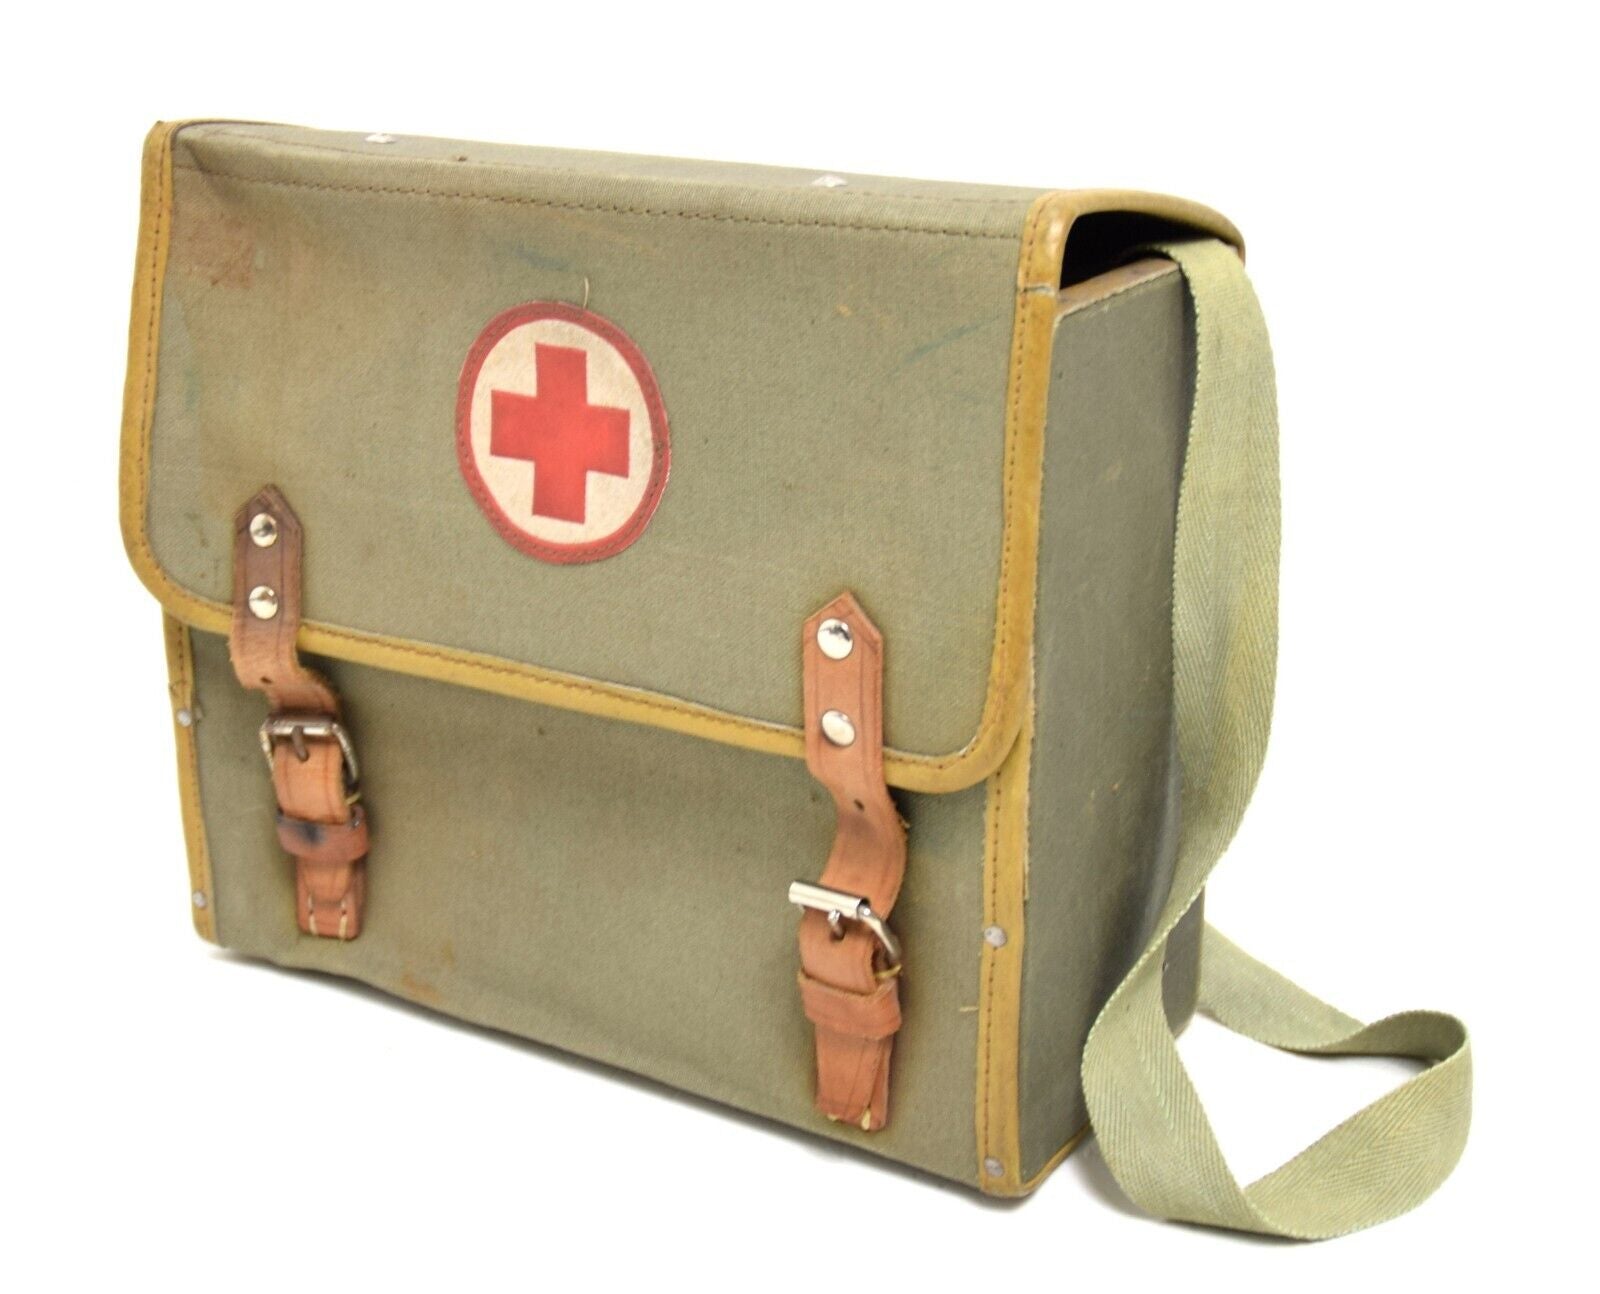 Vintage 1950's First Aid Bag Satchel Box Case Wooden Frame With Canvas & Leather